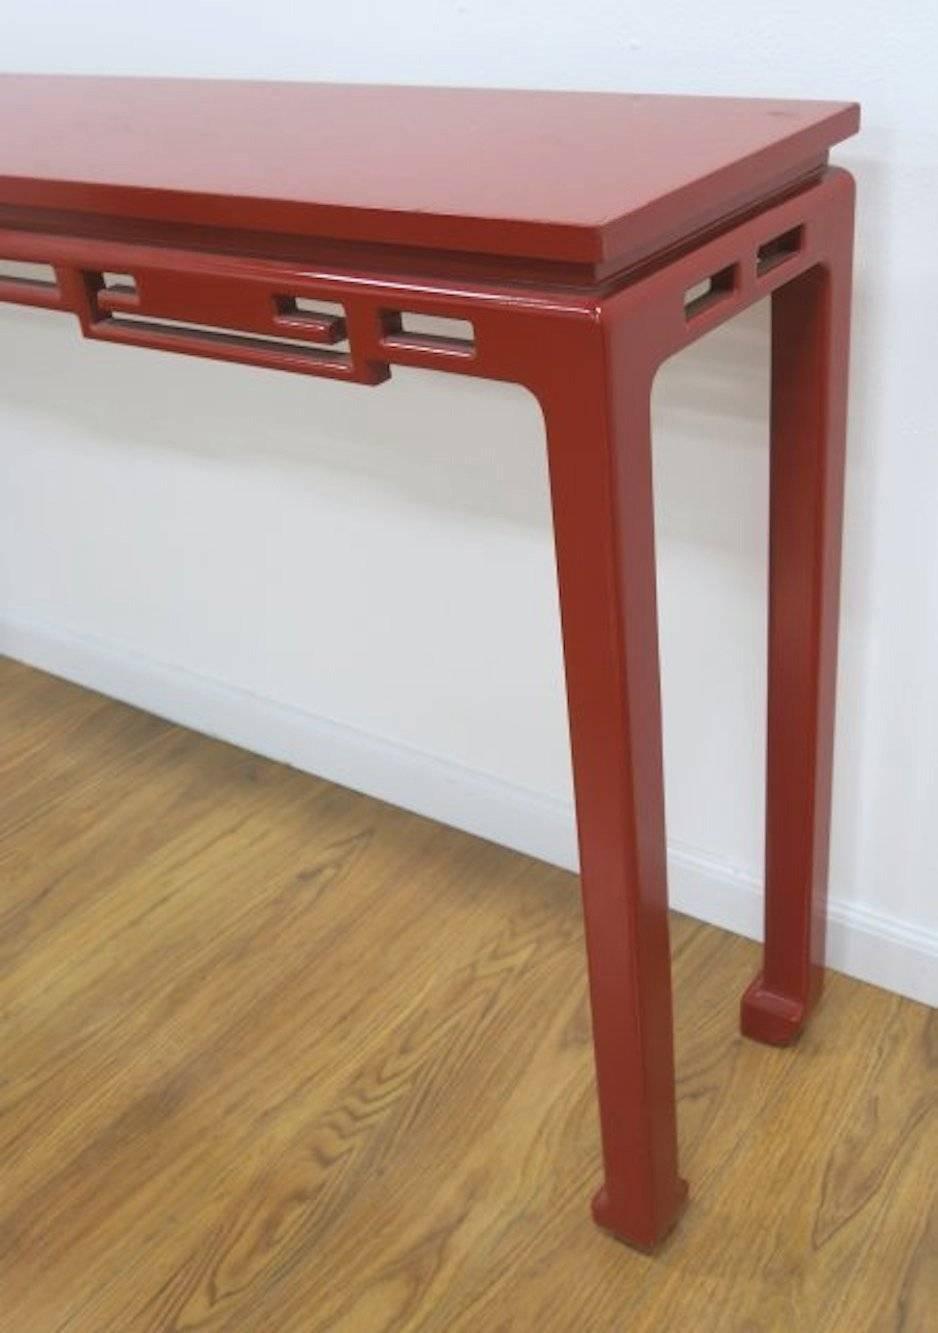 American Mid-Century Modern Asian Style console. Carved fretwork apron above solid legs that end in an upturned horse hoof foot, all professionally lacquered red. 
